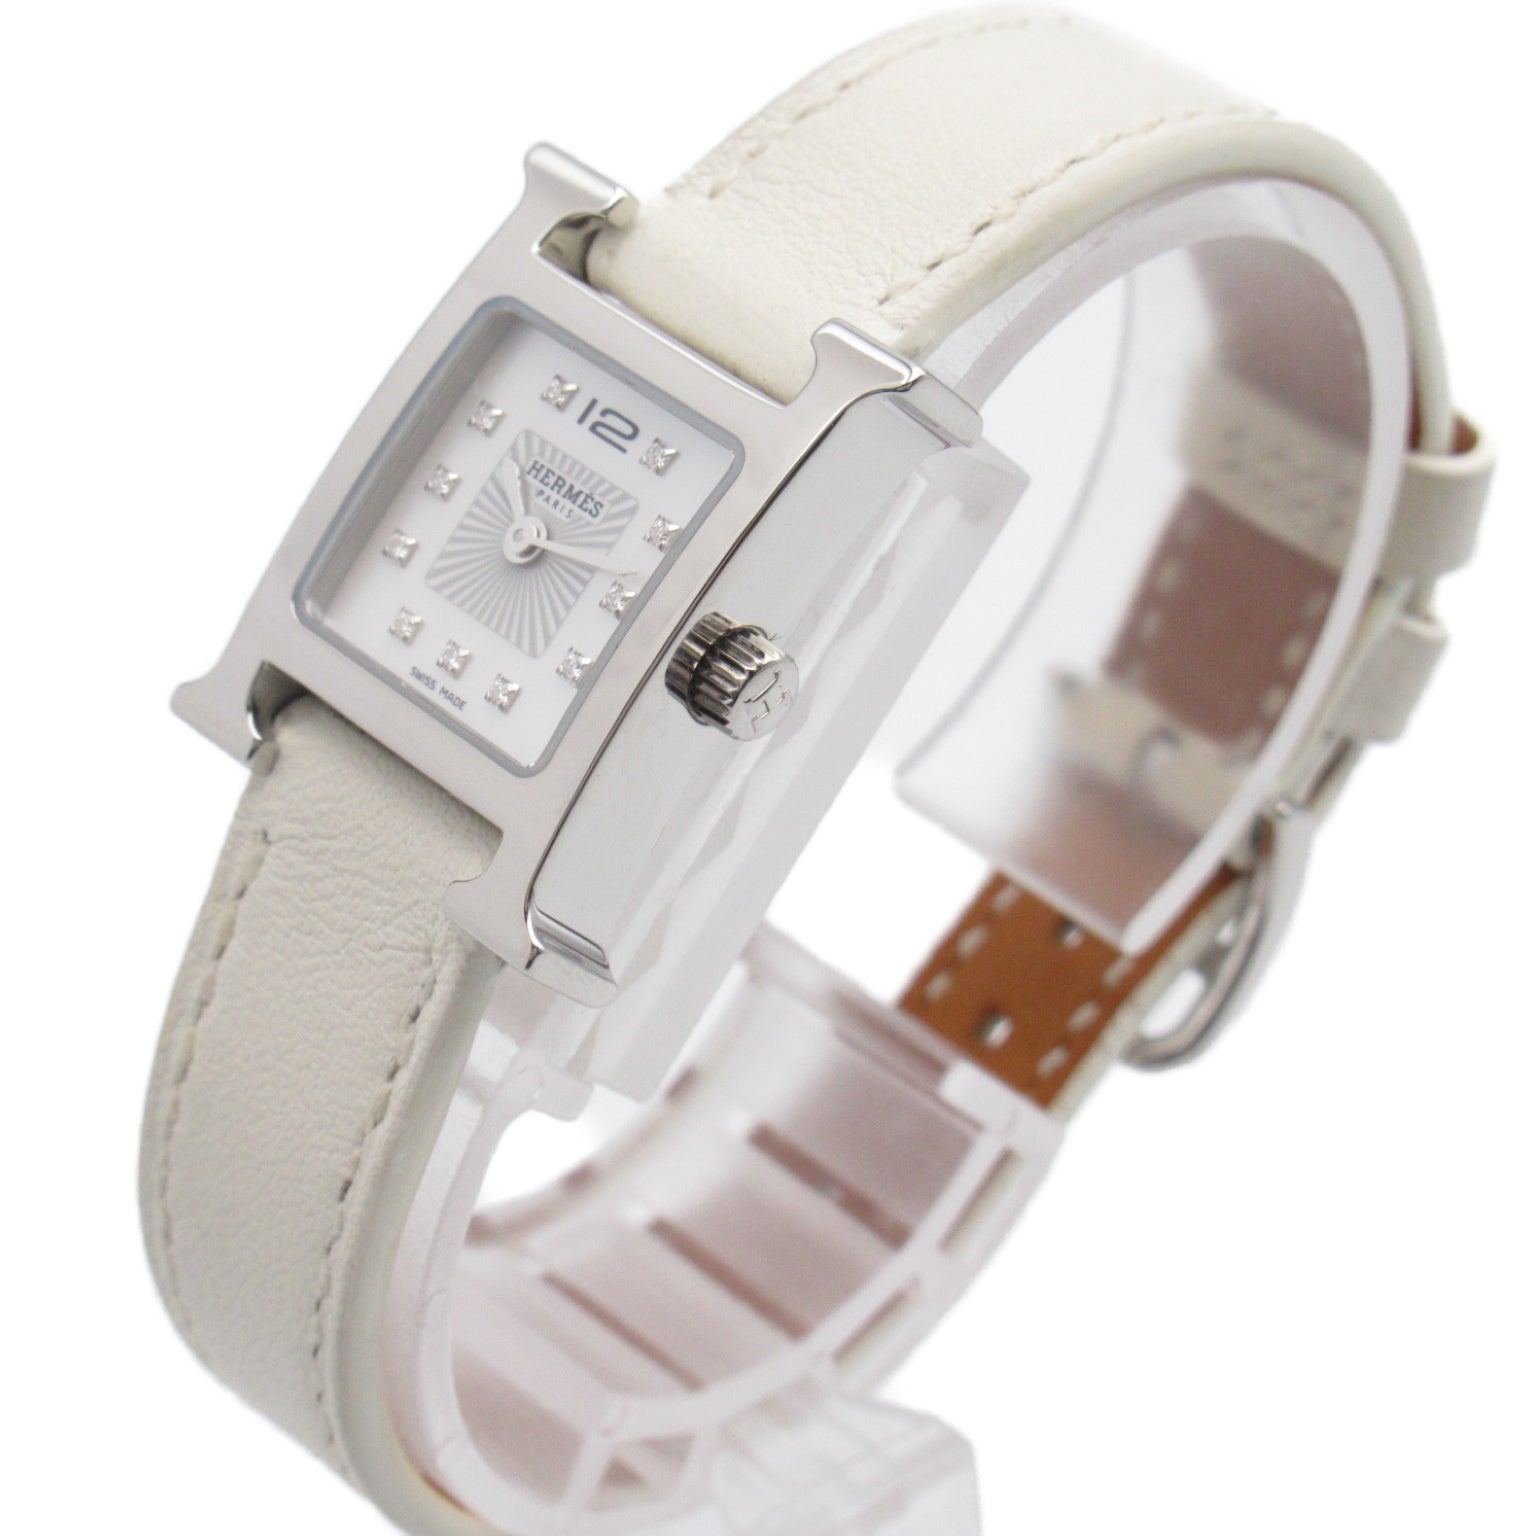 Hermes Hermes H Watch Mini 11P Diamond  Watch Stainless Steel Leather Belt  White S HH1.110